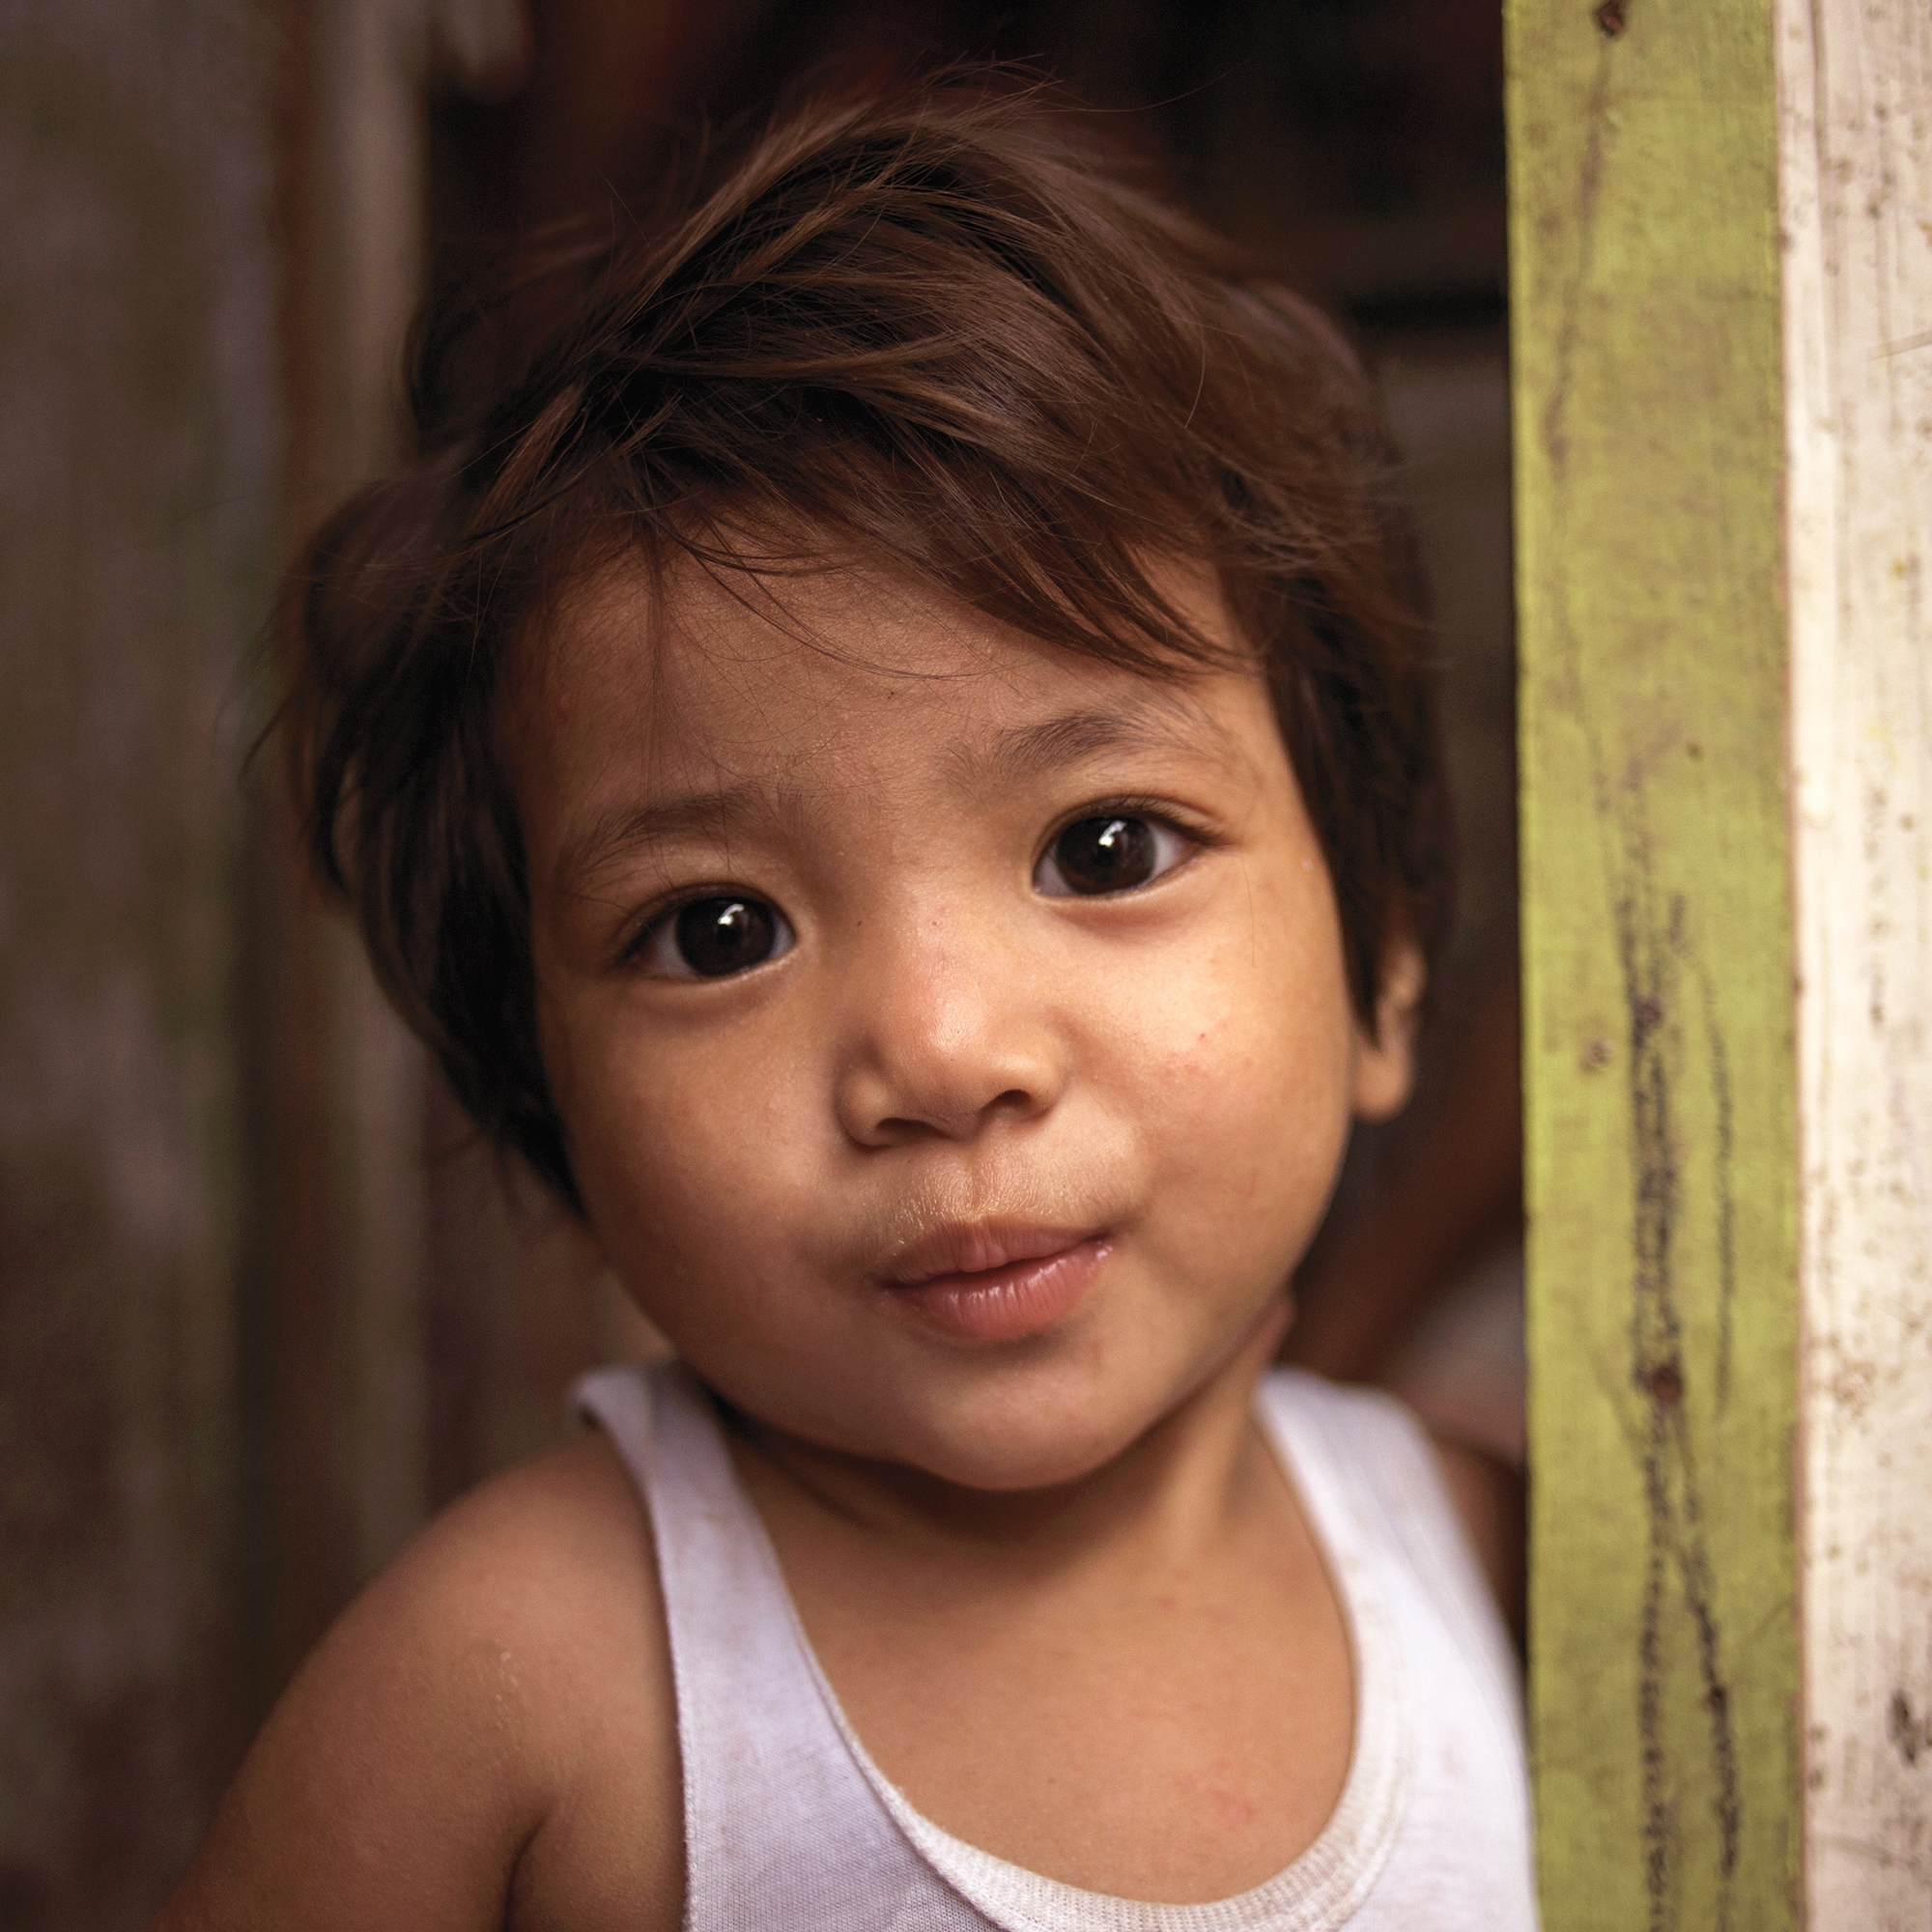 In the Philippines, a young girl smiles while leaning against the frame of a doorway.